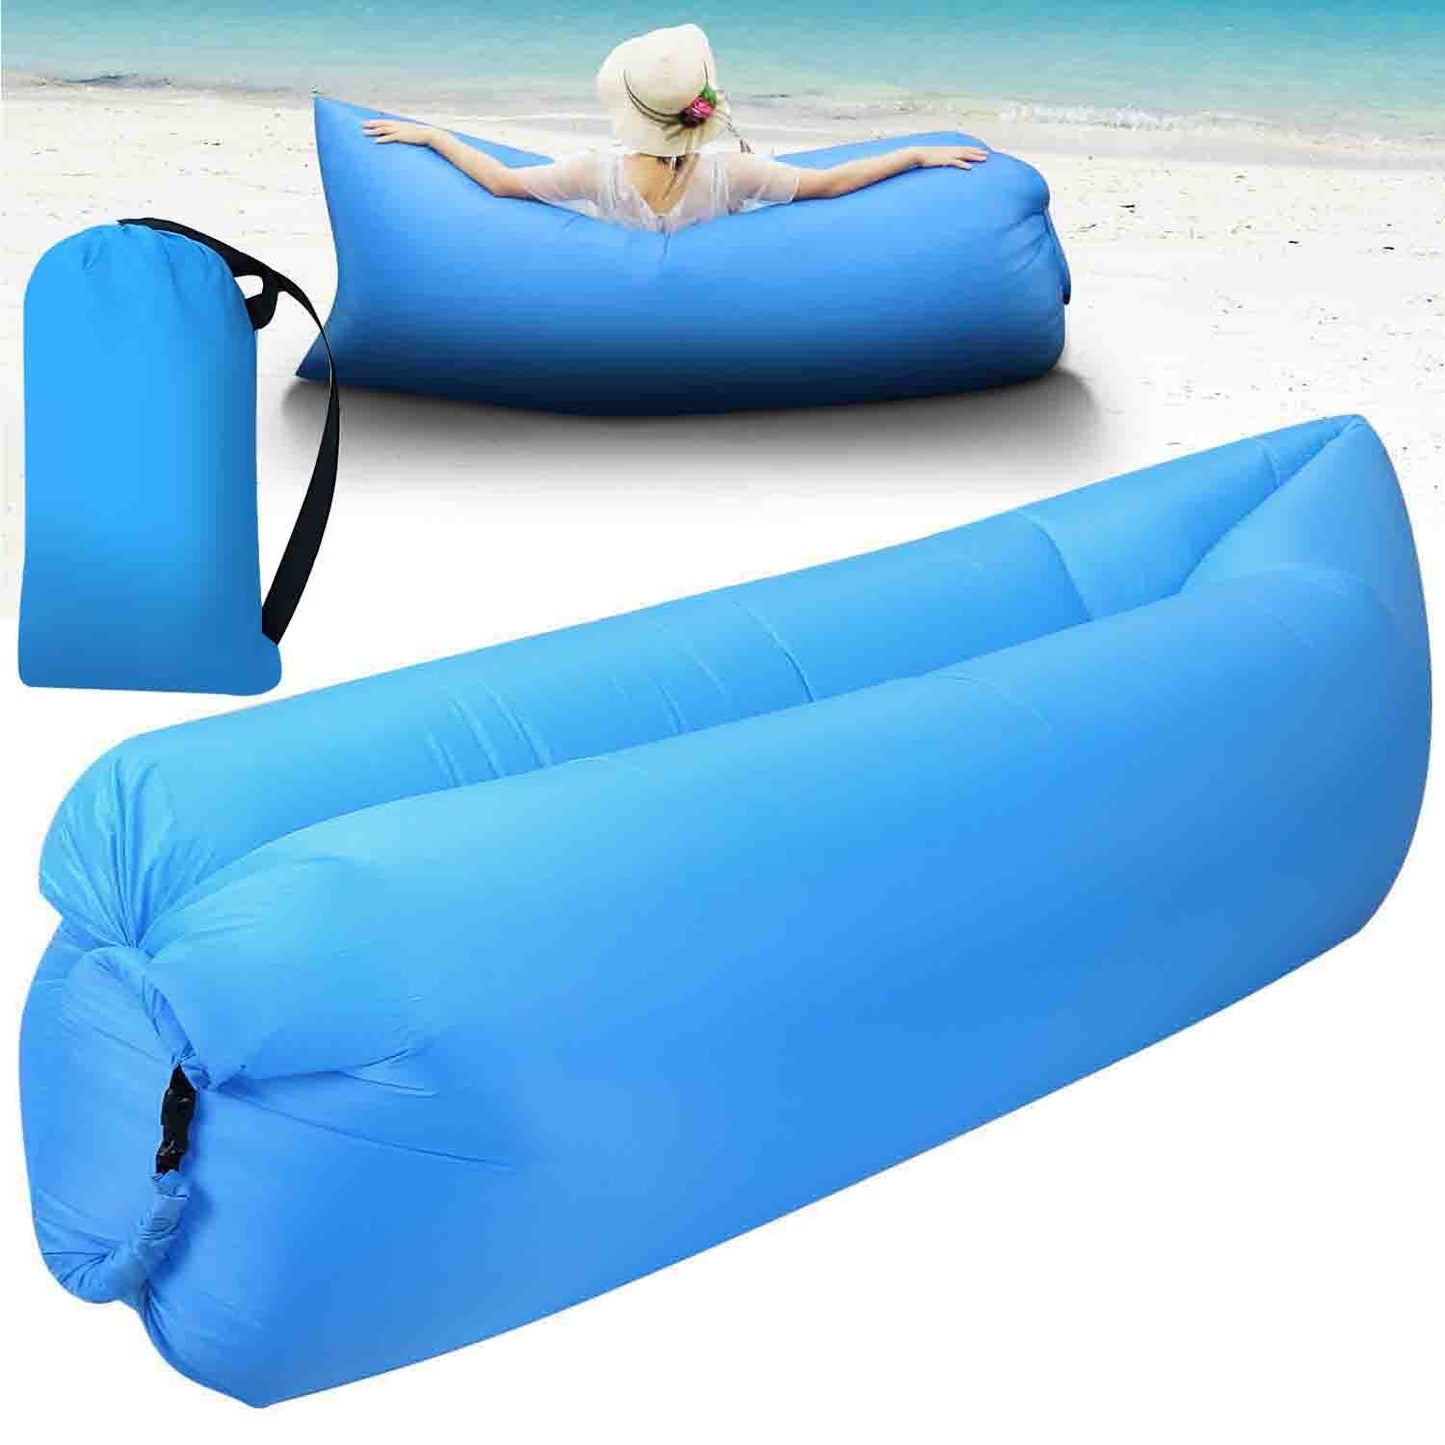 Portable Inflatable Lounger Air Sofa Lazy Bed Sofa